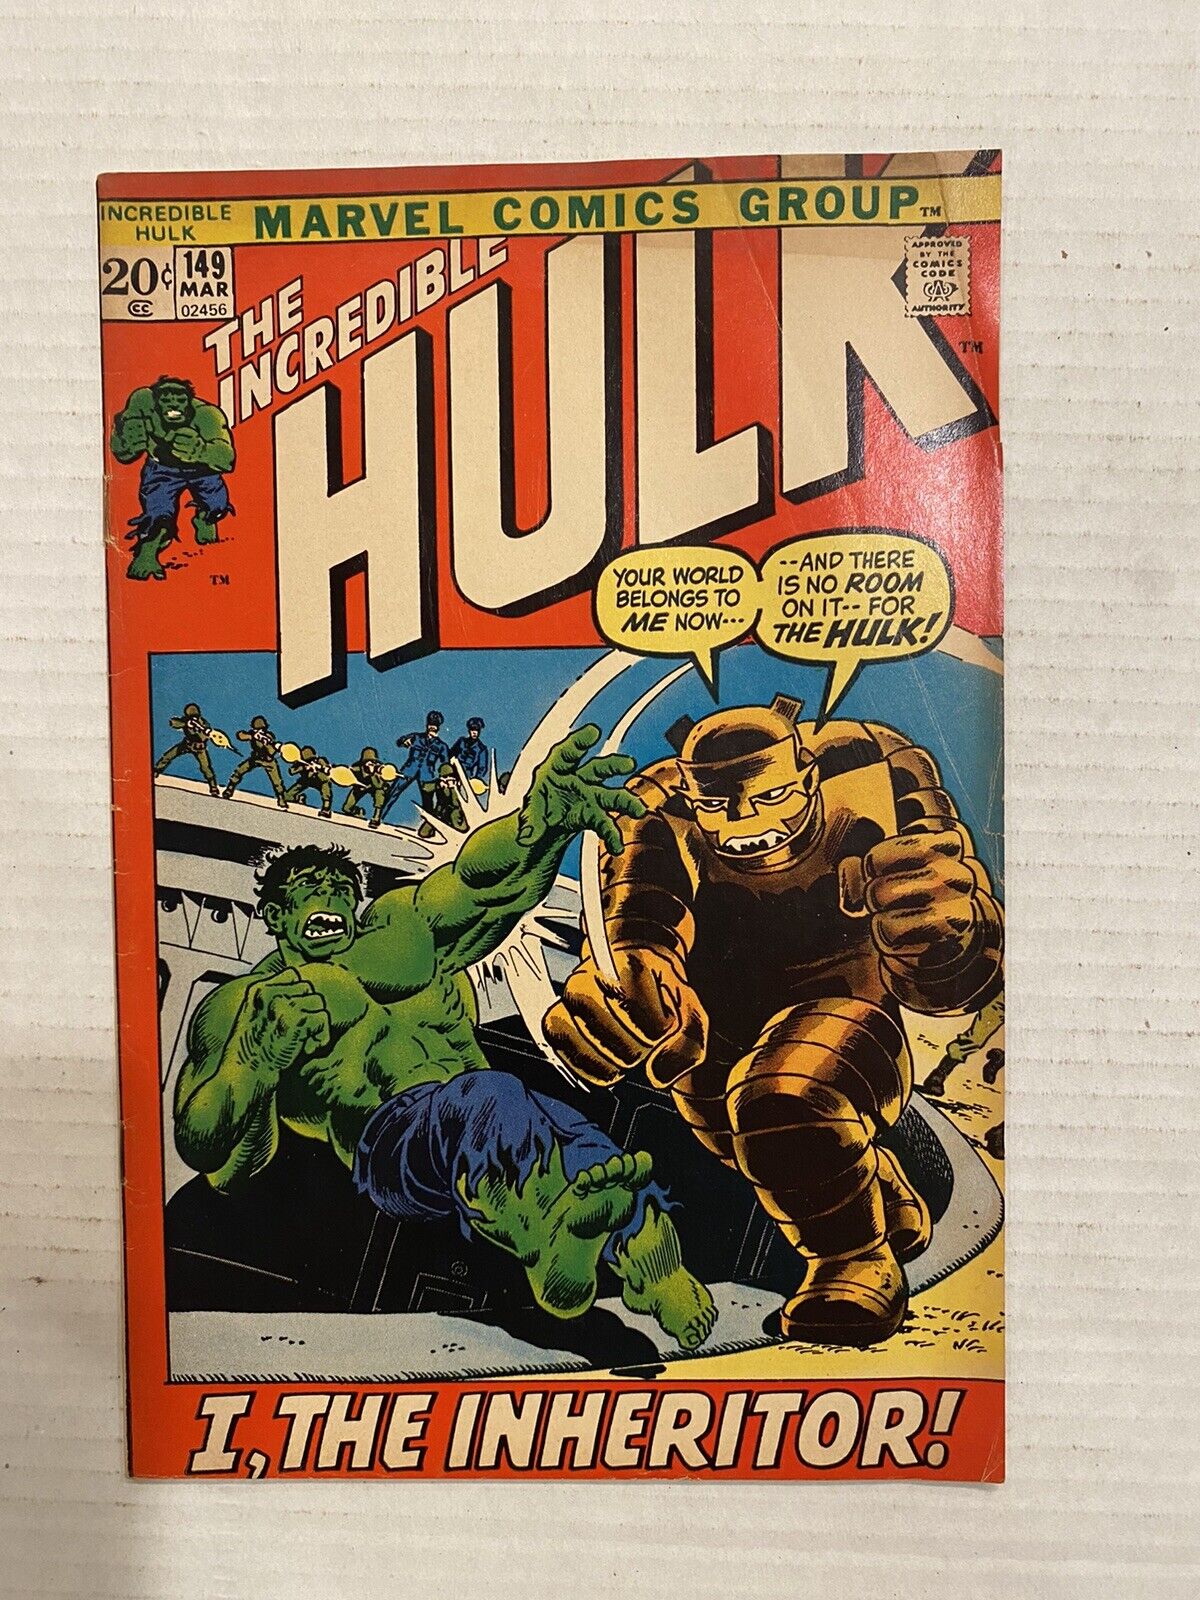 INCREDIBLE HULK #149 1972 1st appearance of the Inheritor BRONZE AGE